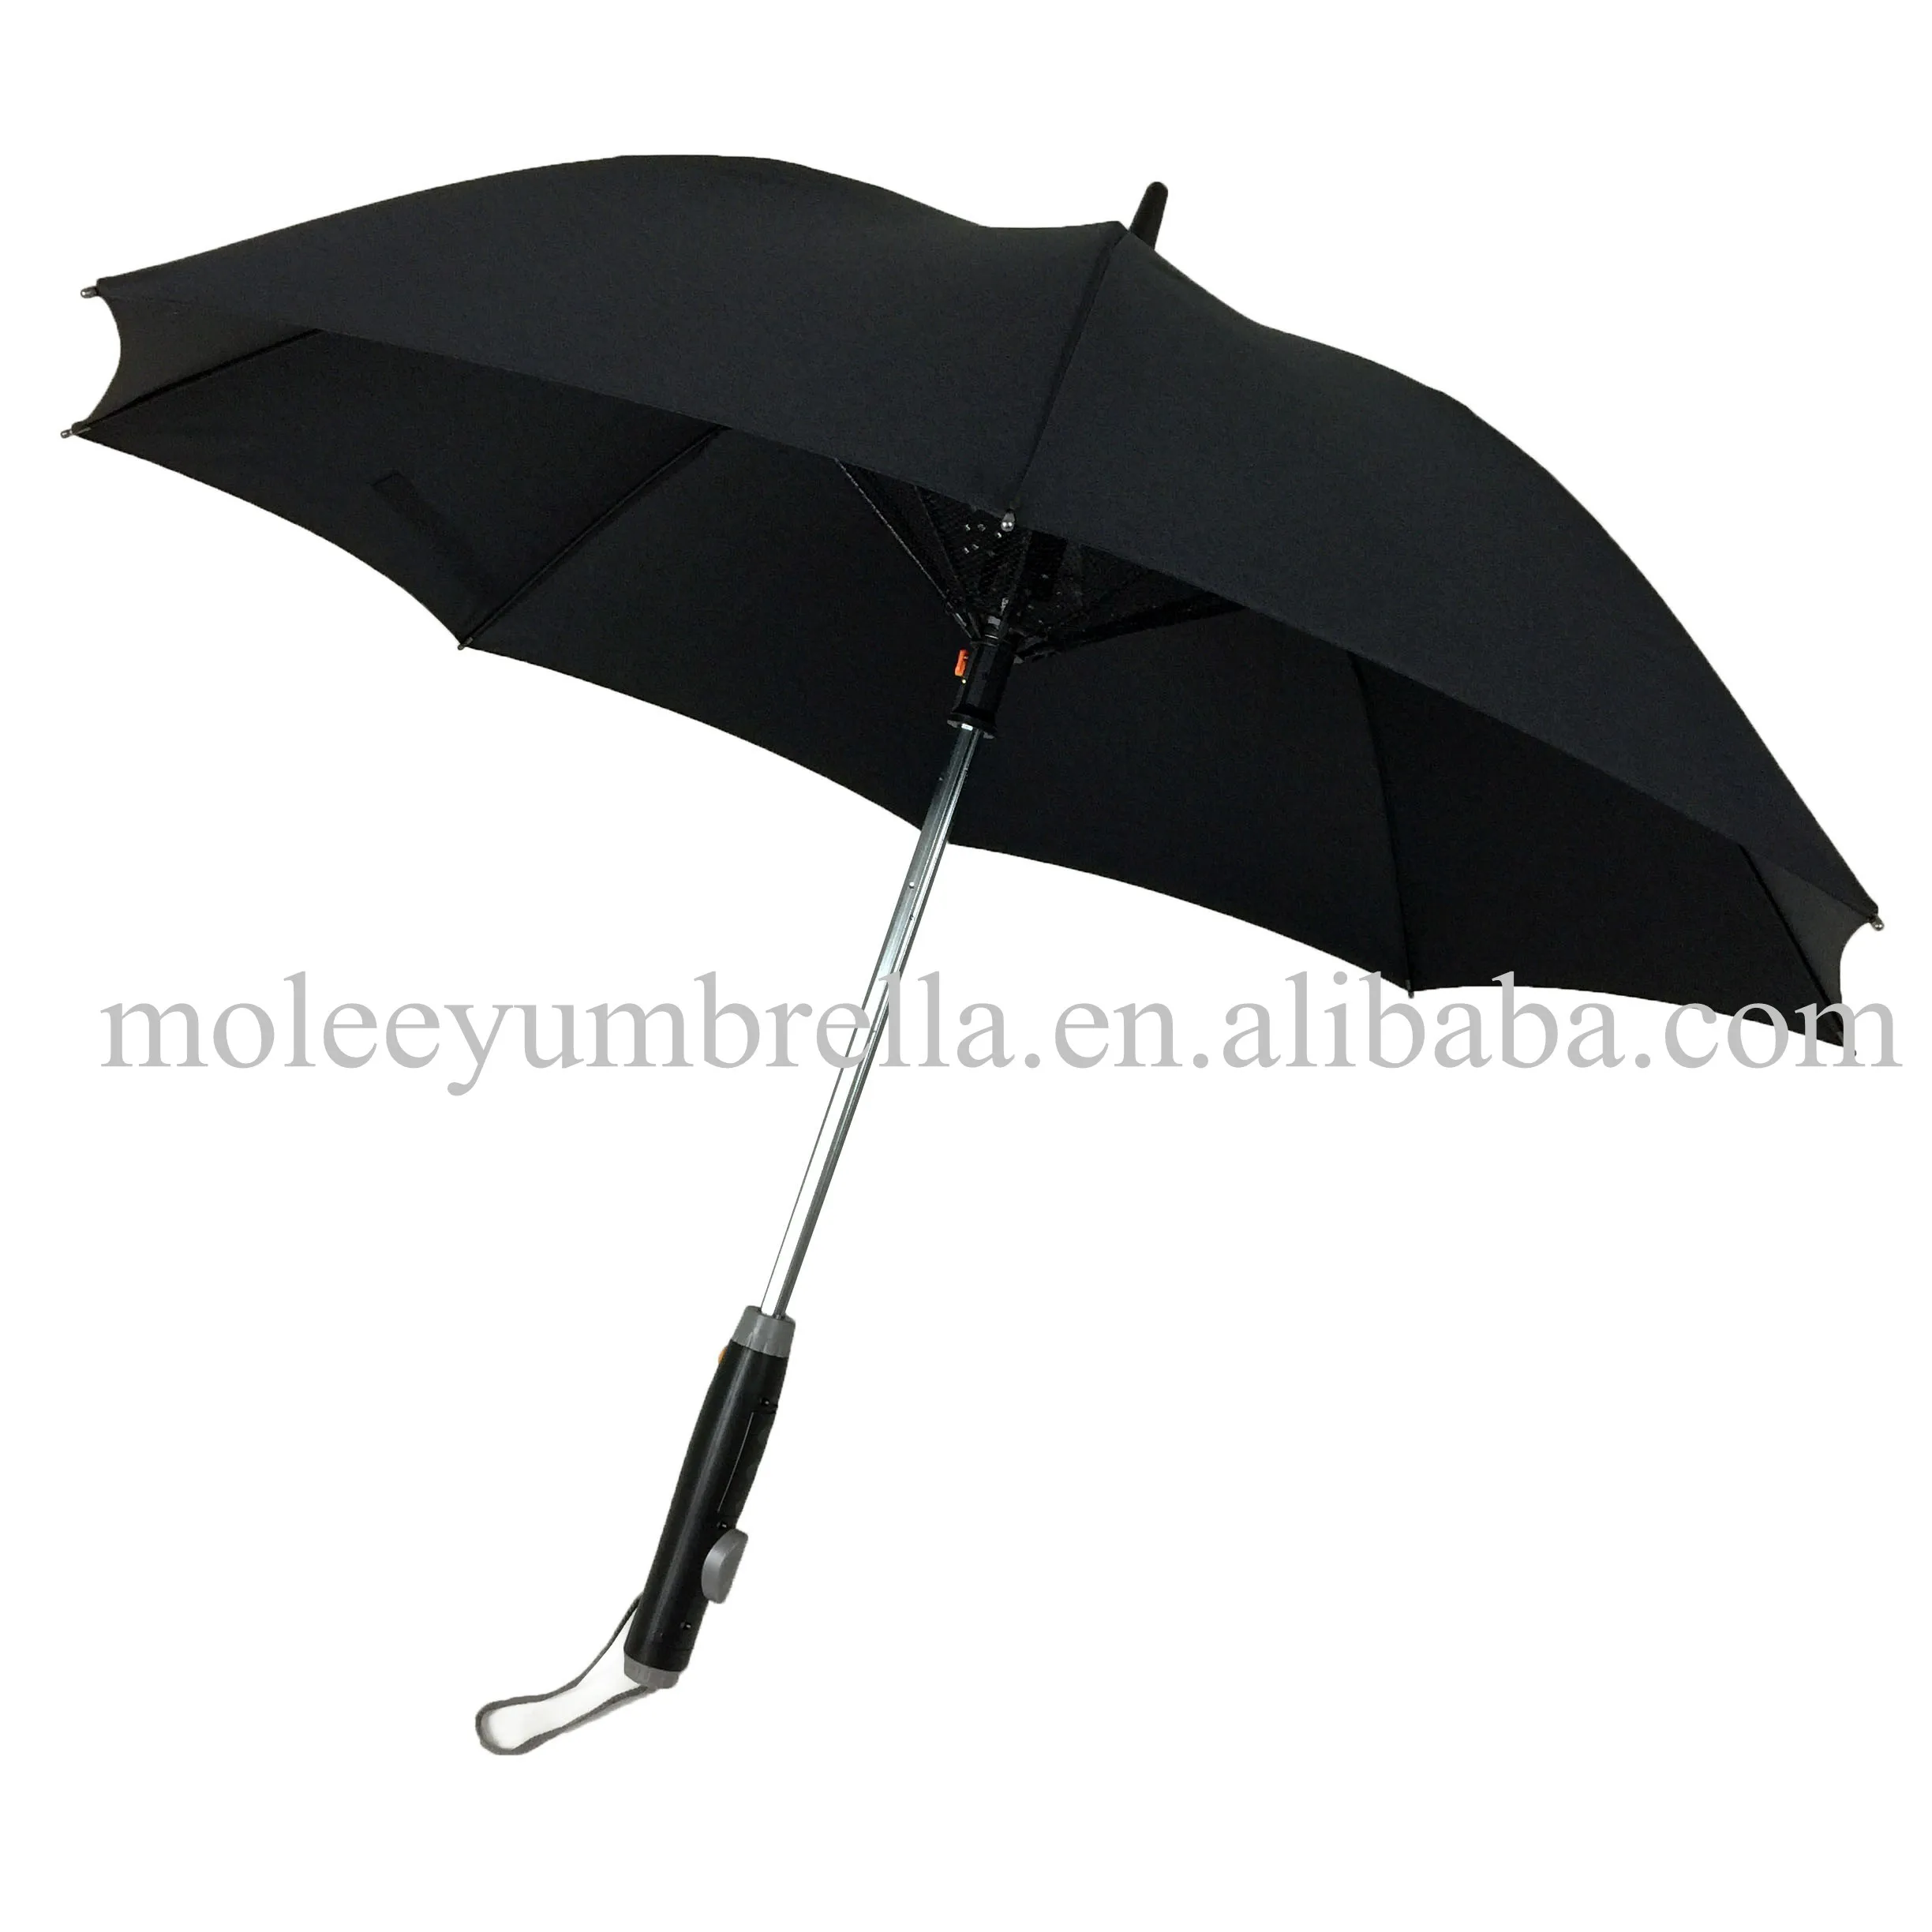 Umbrella with Fan and Water Spray Function